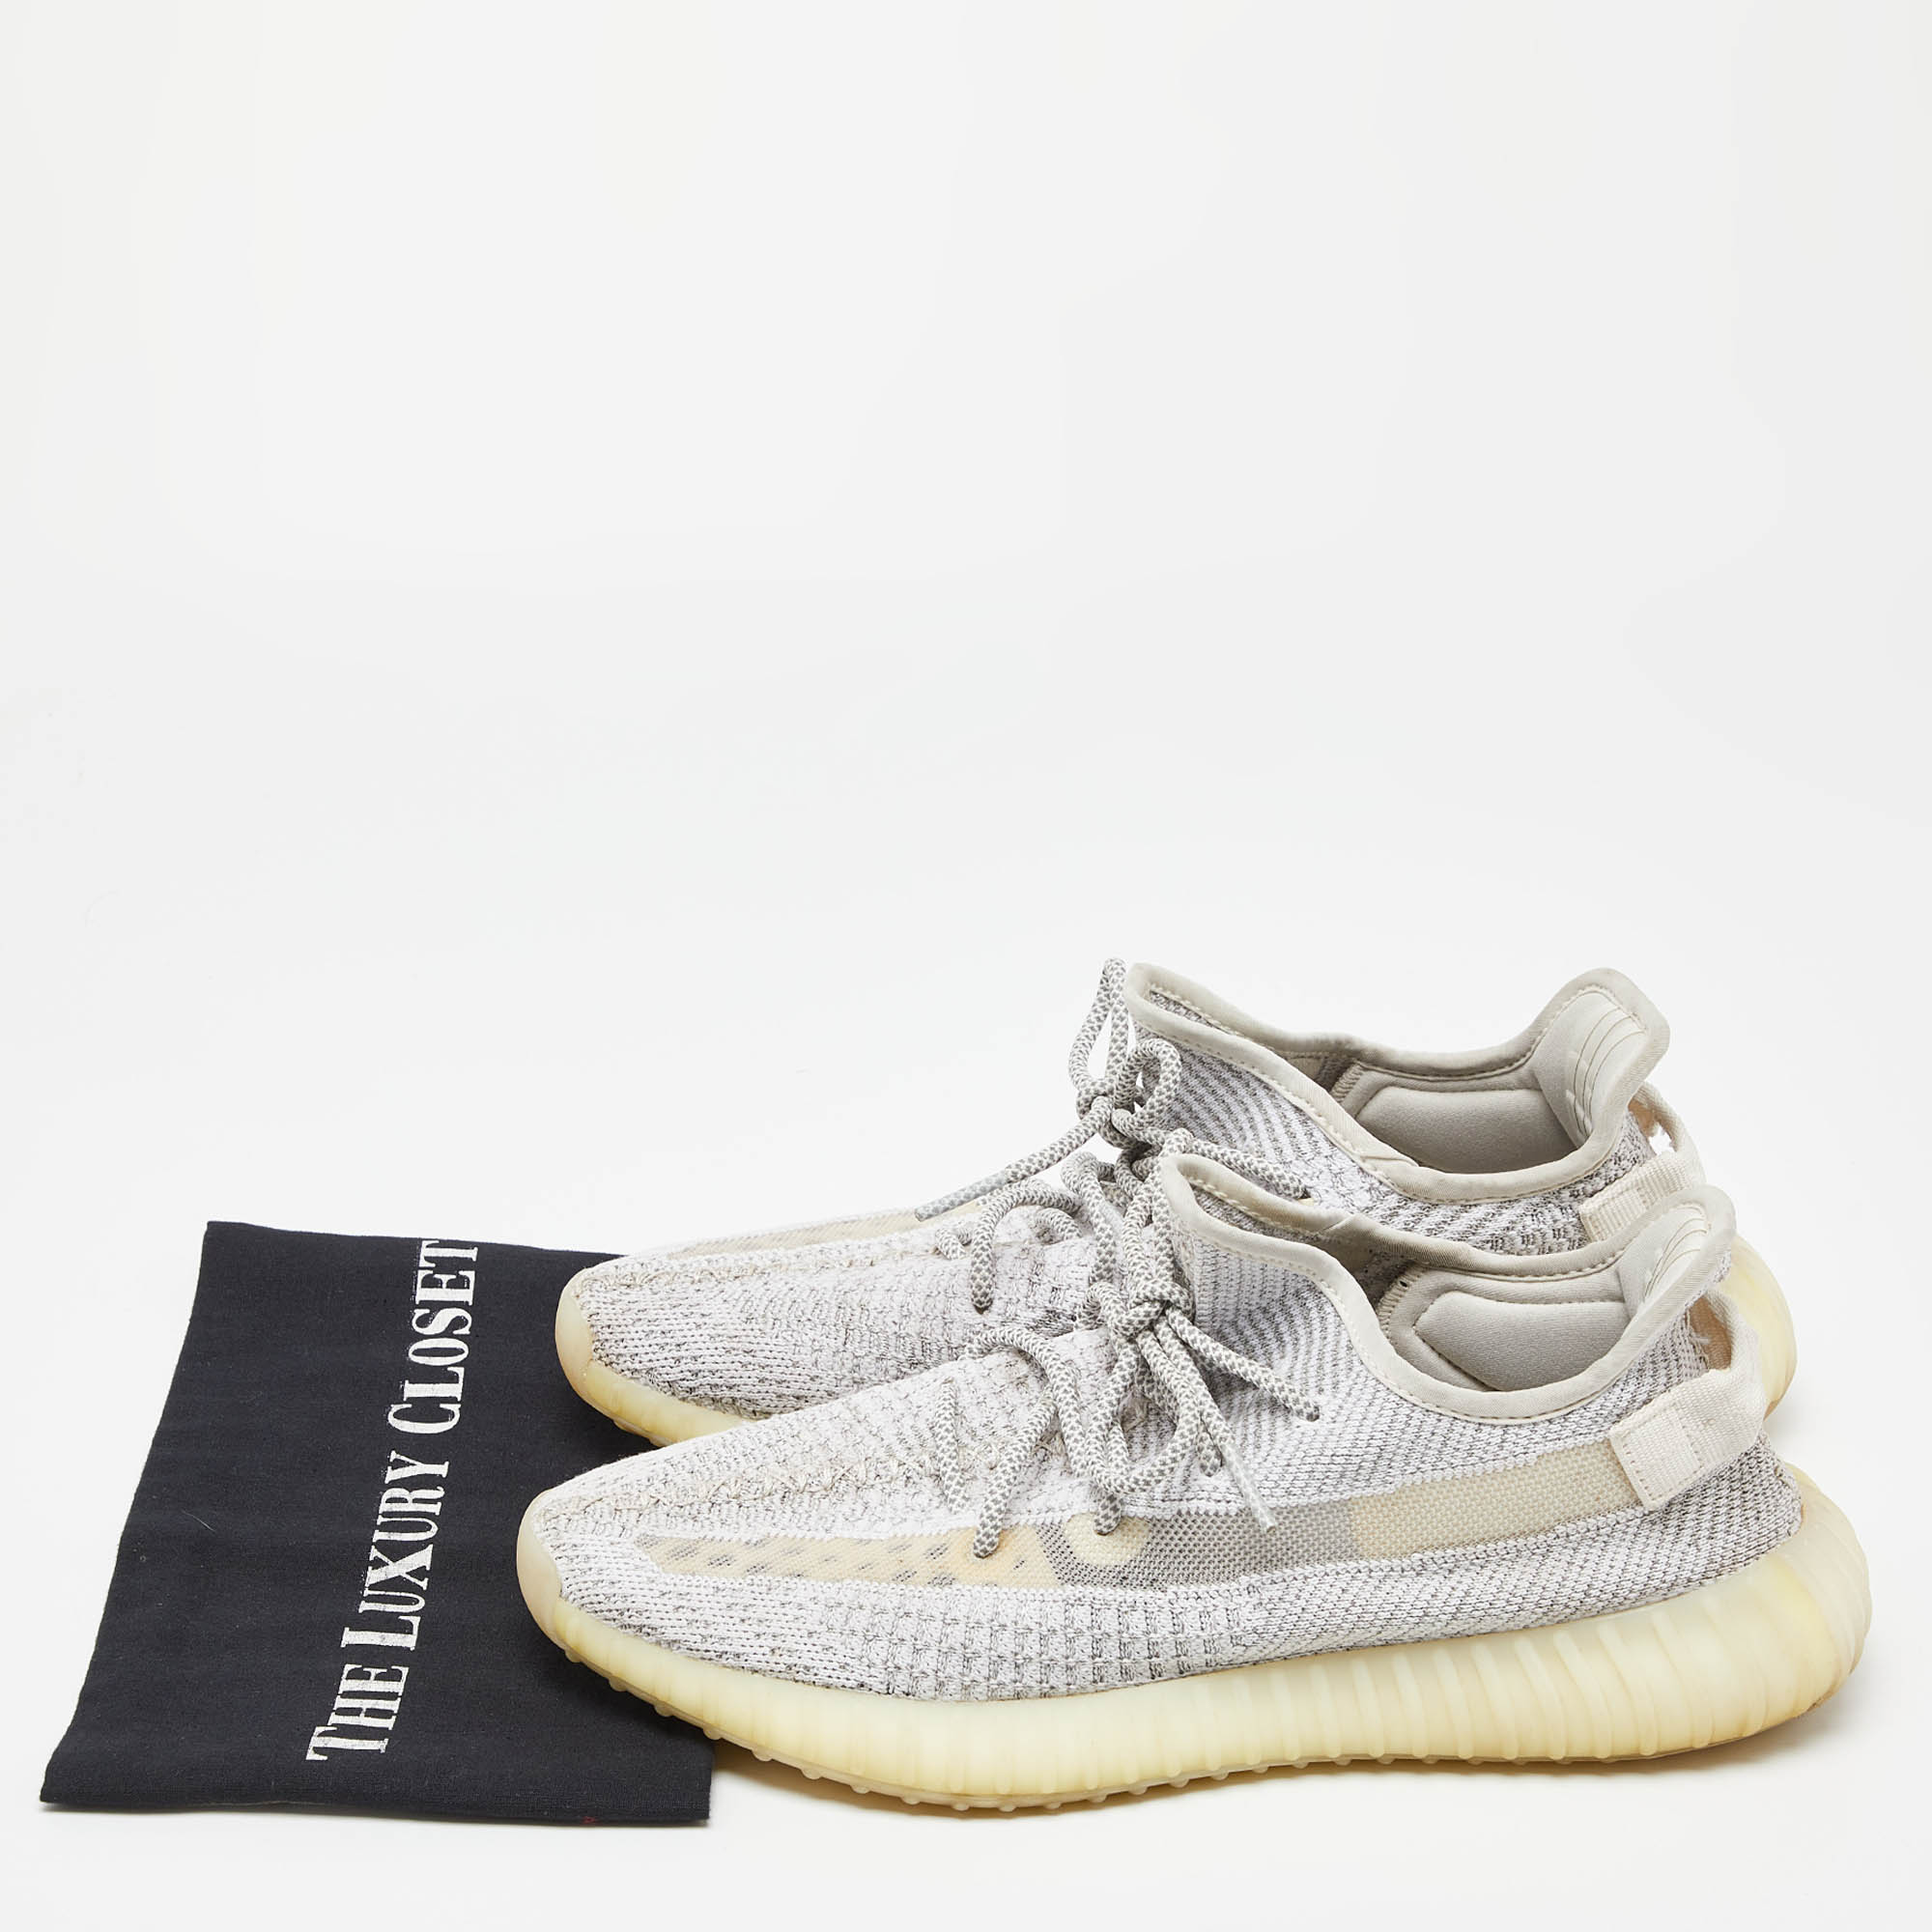 Yeezy X Adidas White/Grey Knit Fabric Boost 350 V2 Static Reflective Sneakers Size 46